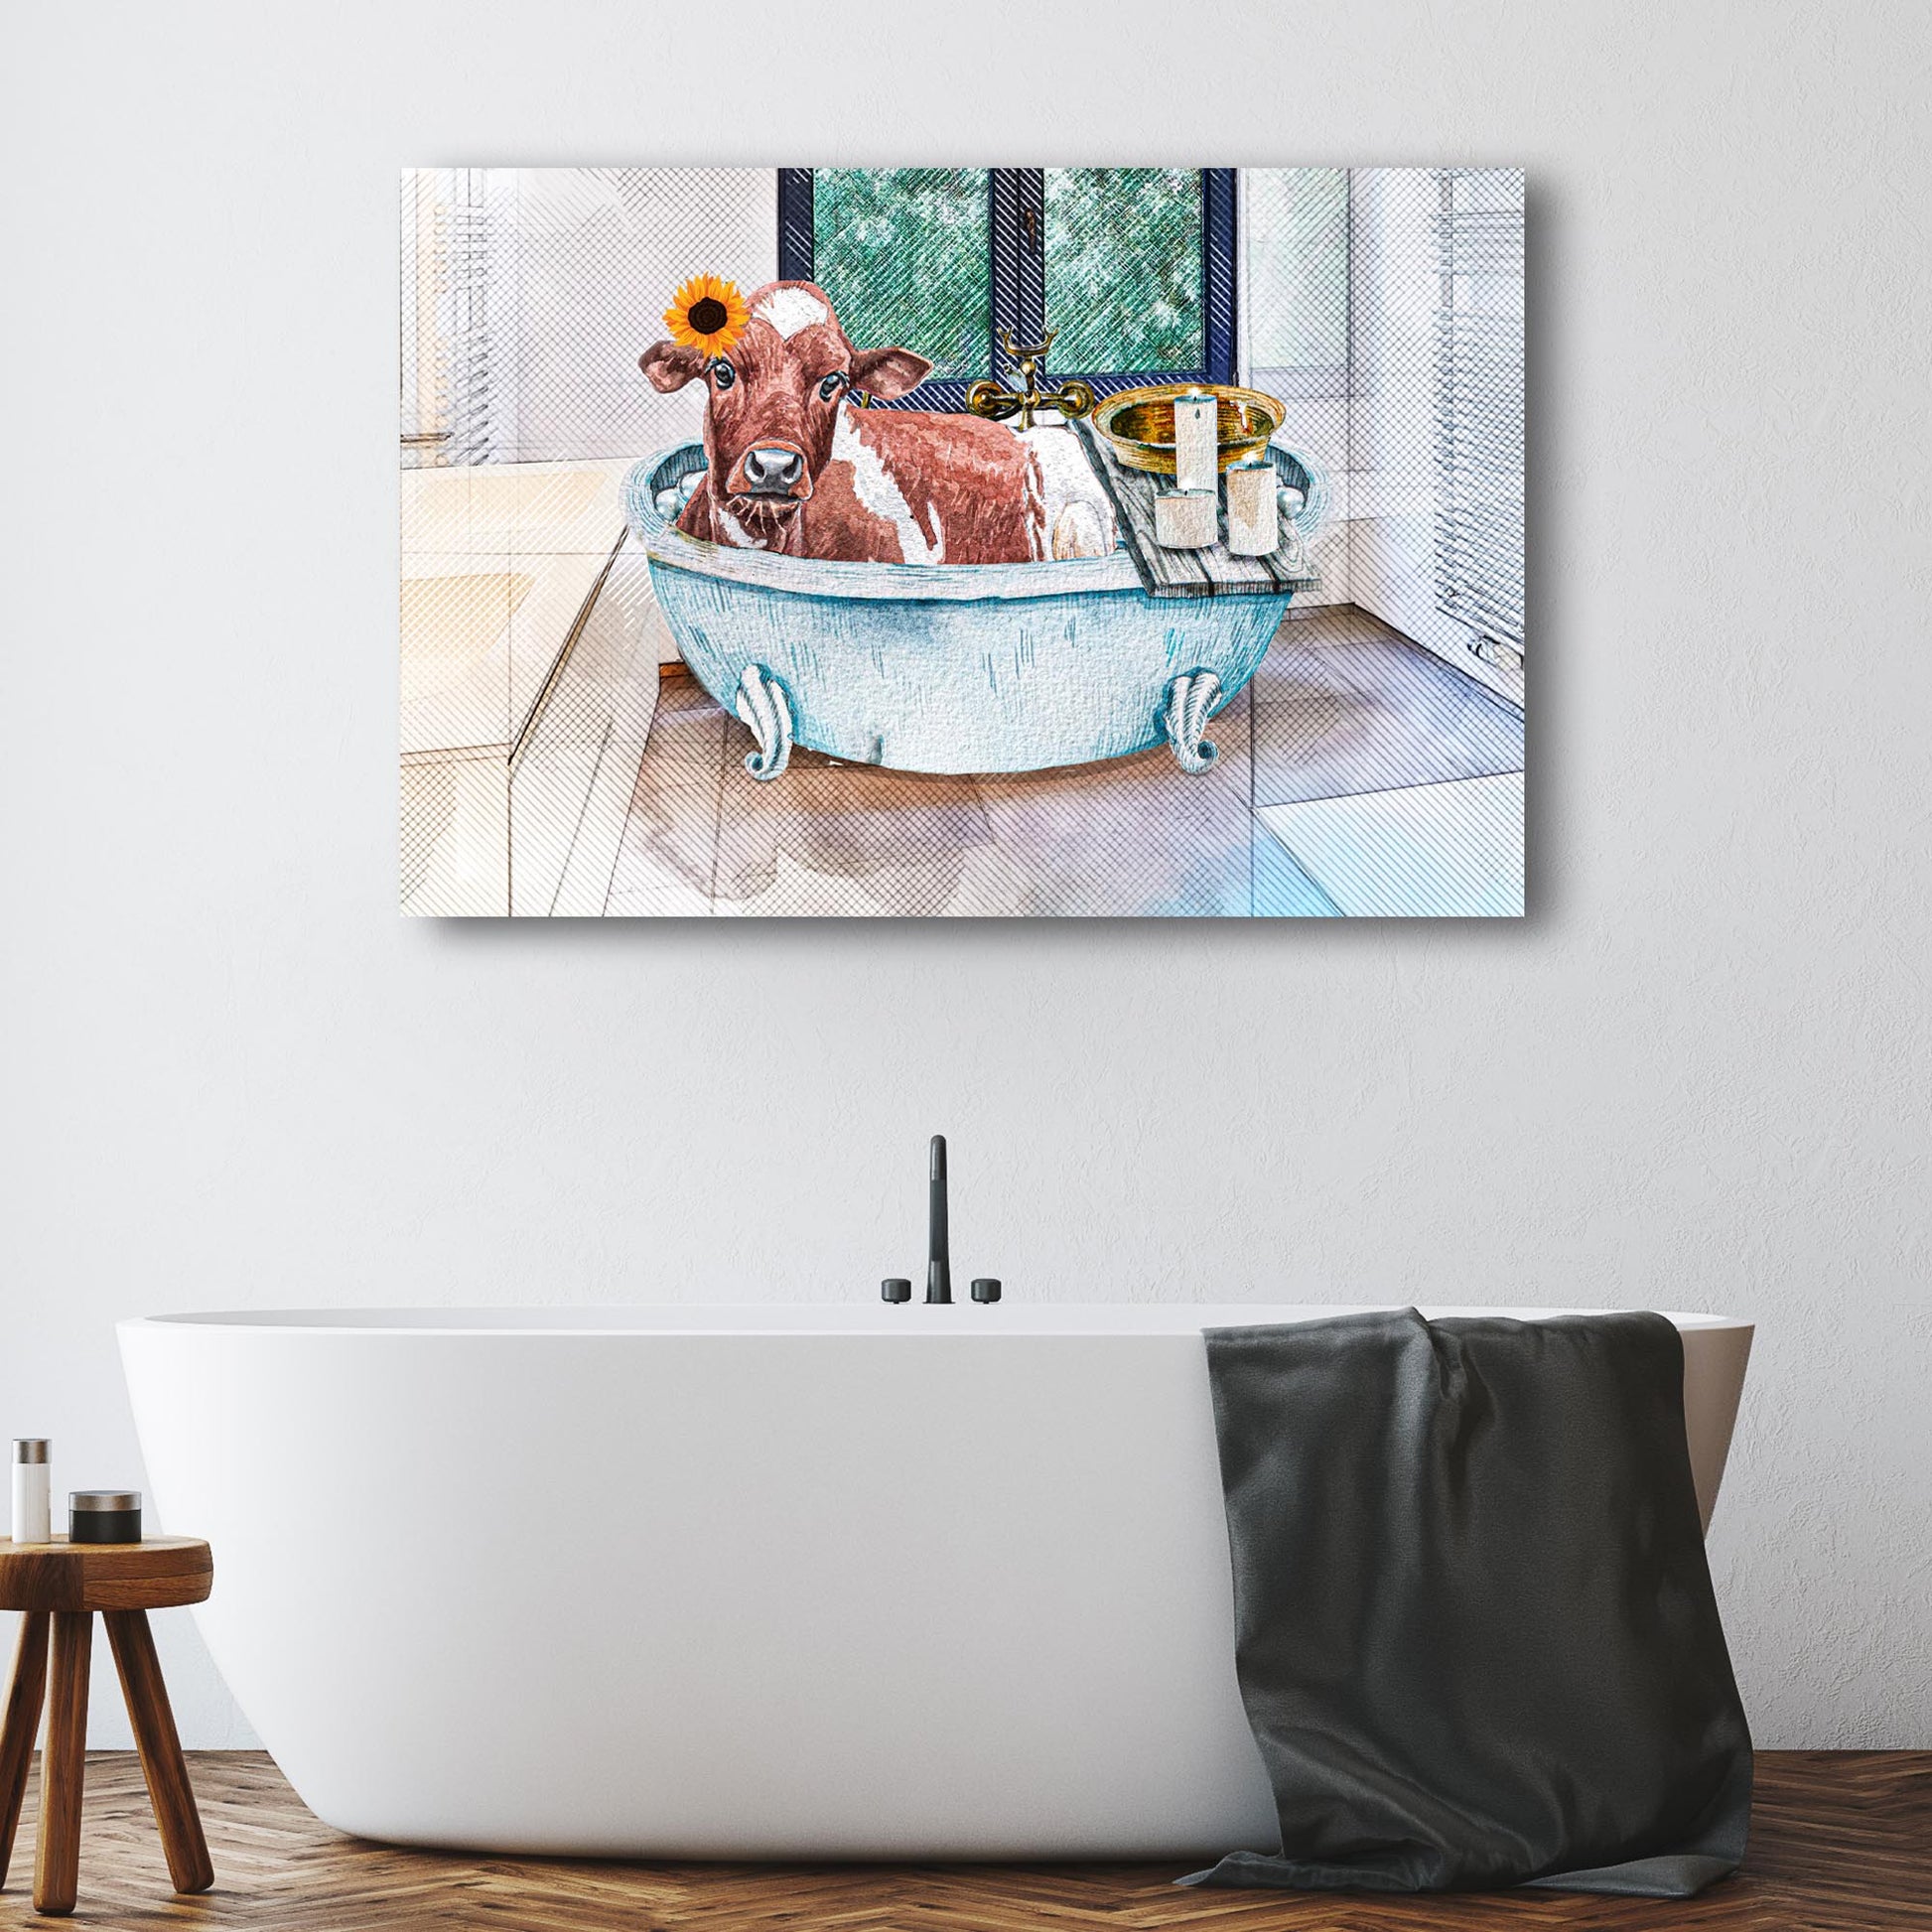 Cow Cattle In Bathtub Canvas Wall Art Style 2 - Image by Tailored Canvases